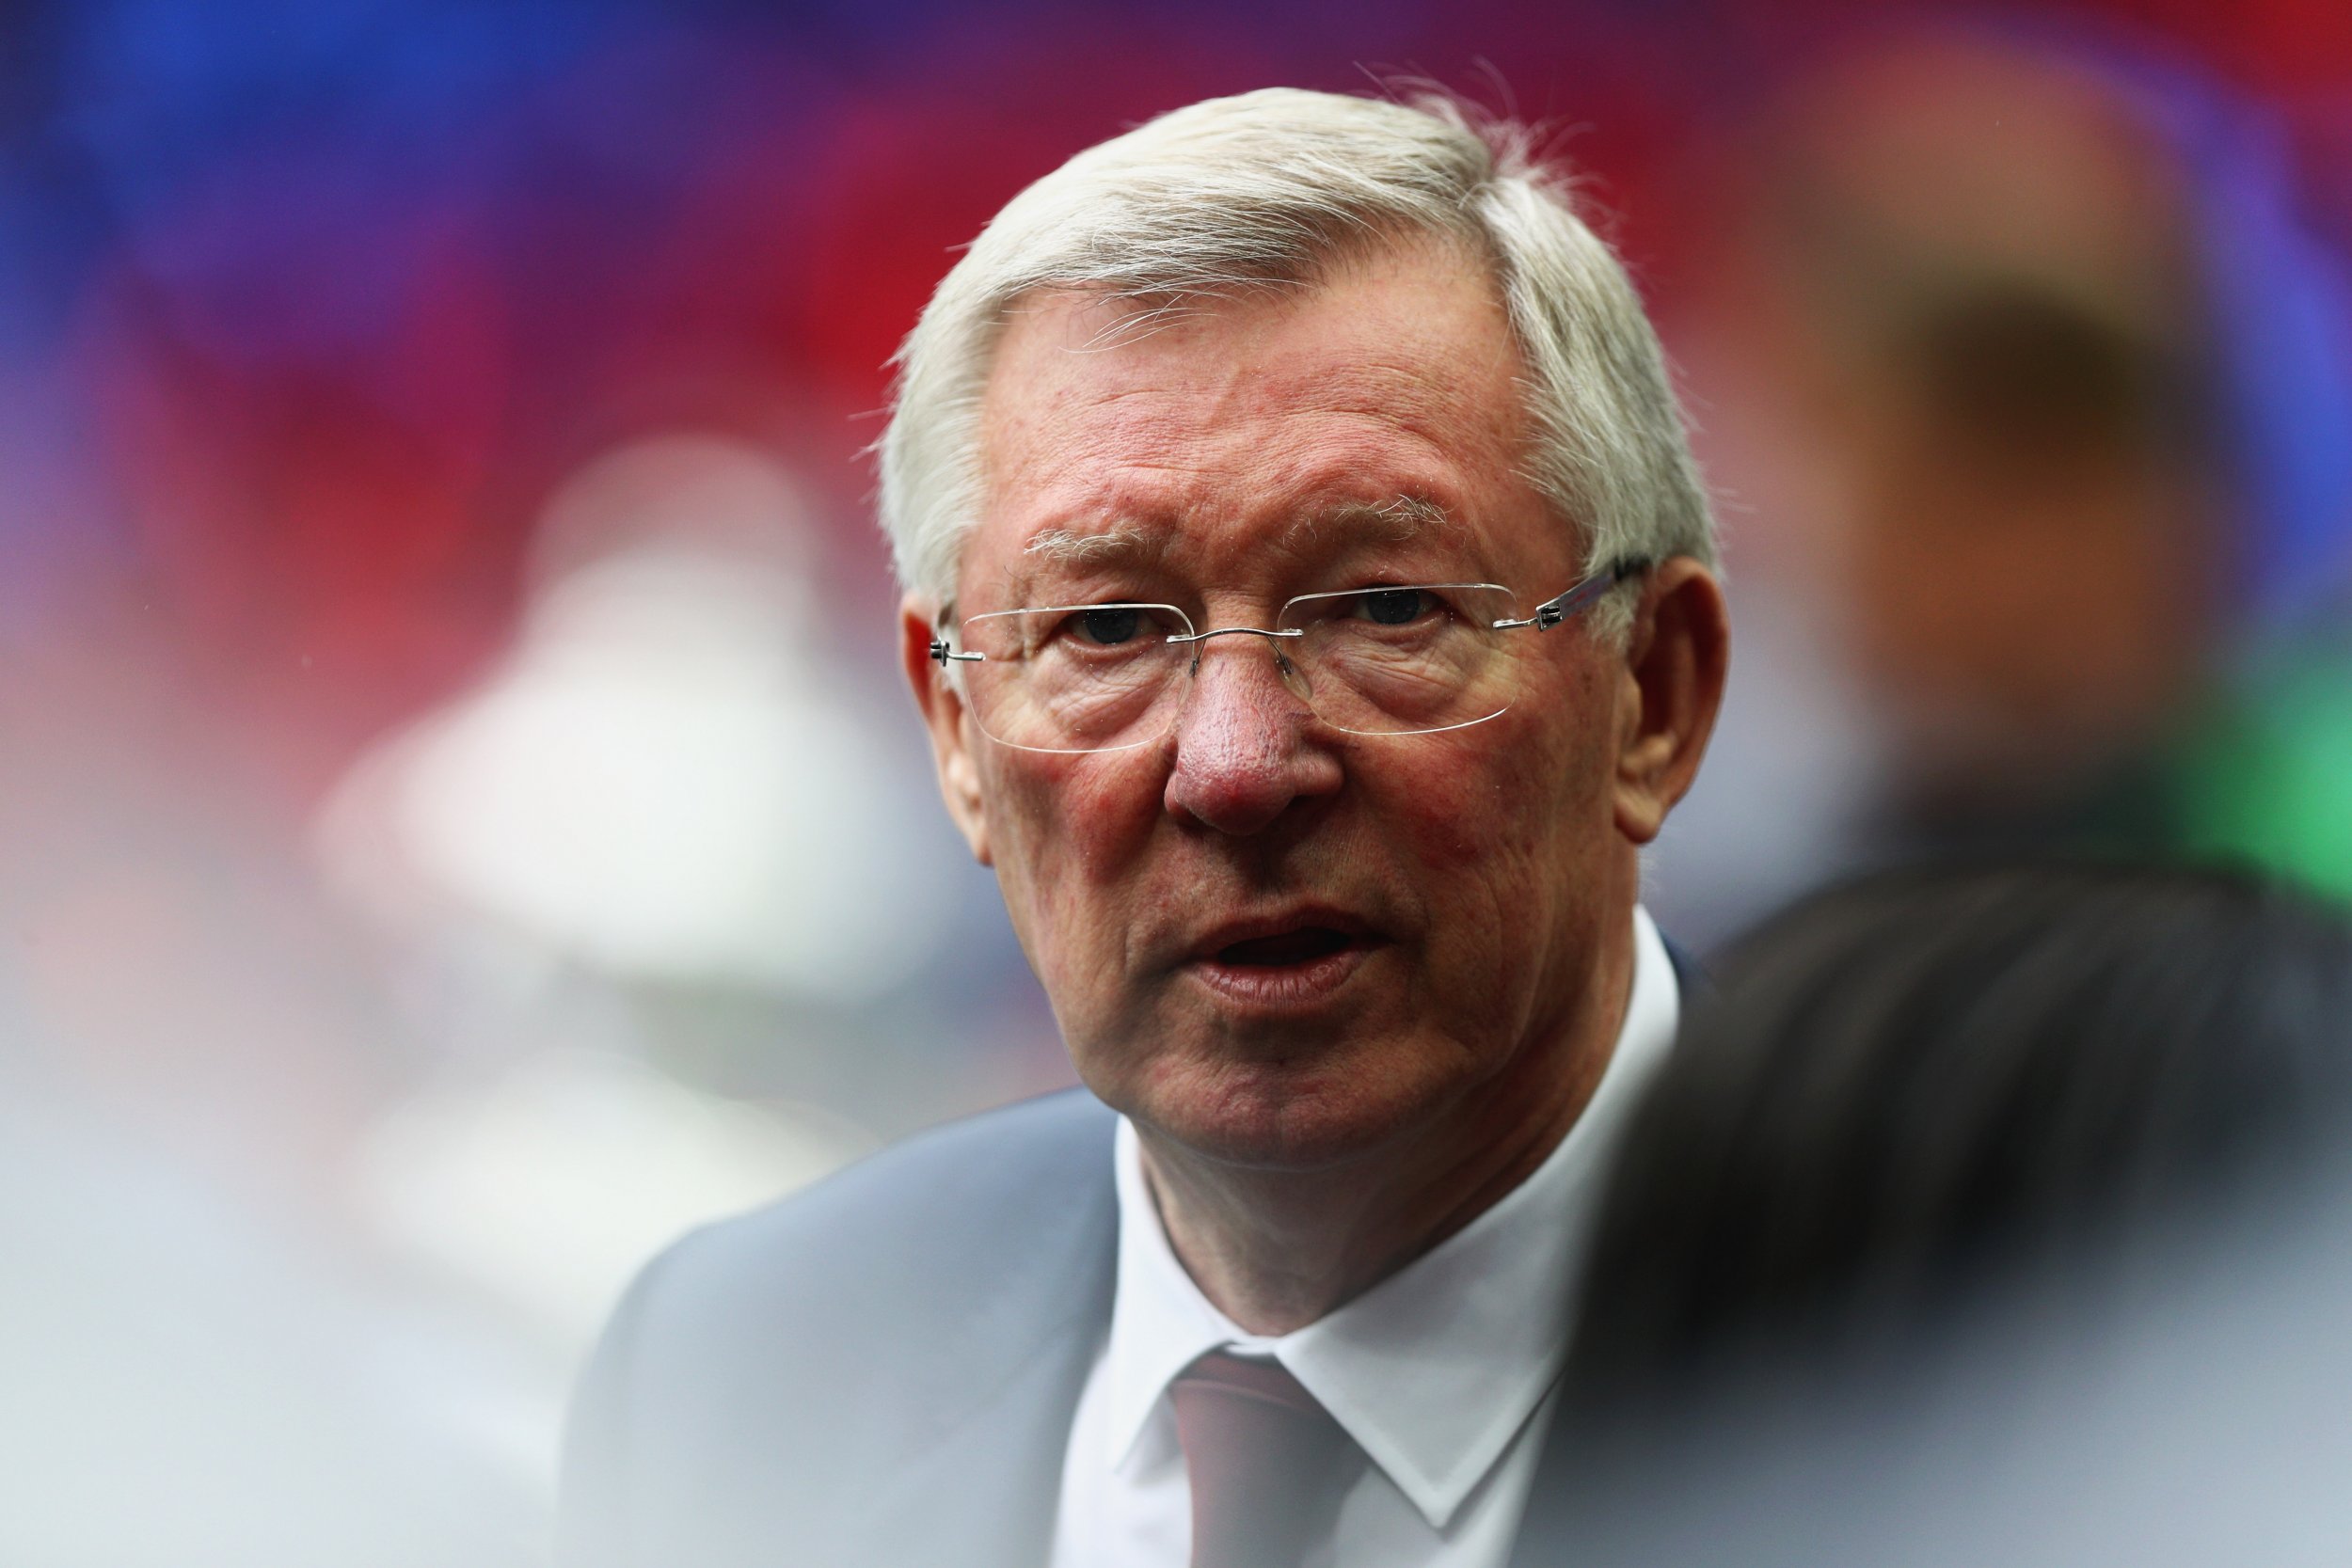  Sir Alex Ferguson, the legendary manager of Manchester United, is seen here expressing his disapproval, likely towards the gray jersey that the team wore during a match, which he believes contributed to their loss.